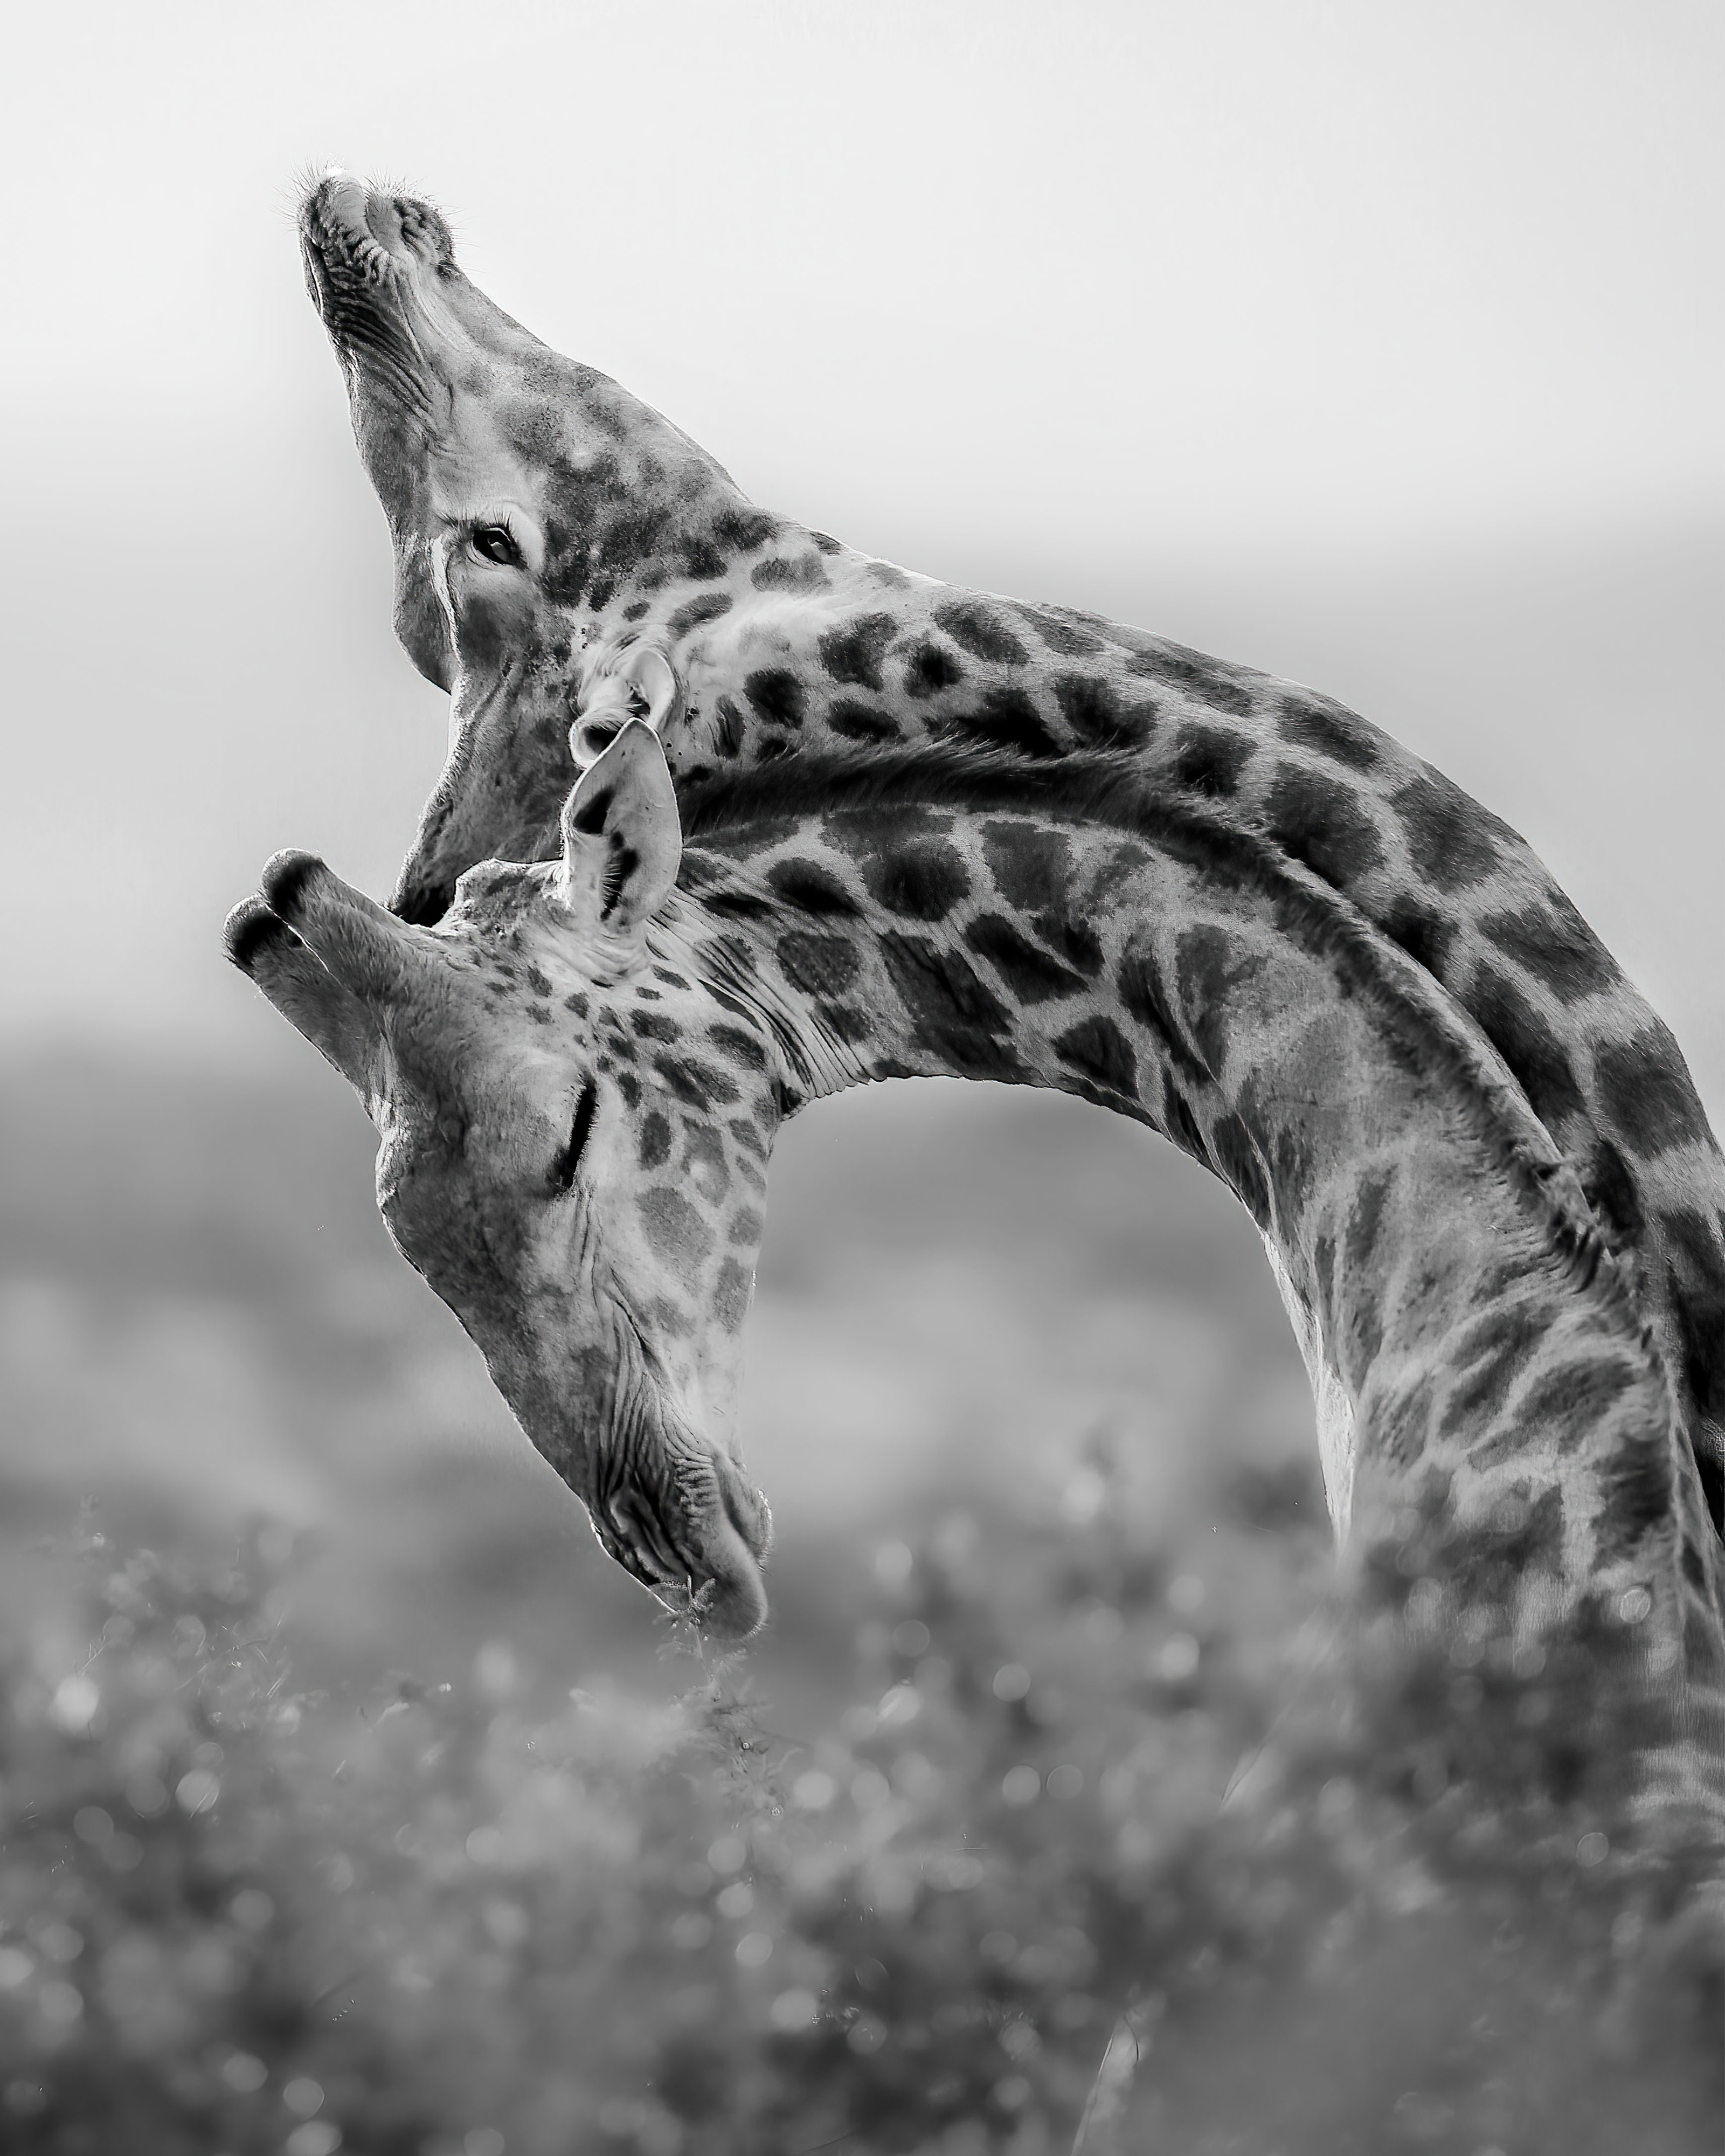 In black and white, 2 giraffes stretch their necks against each other in an arc.